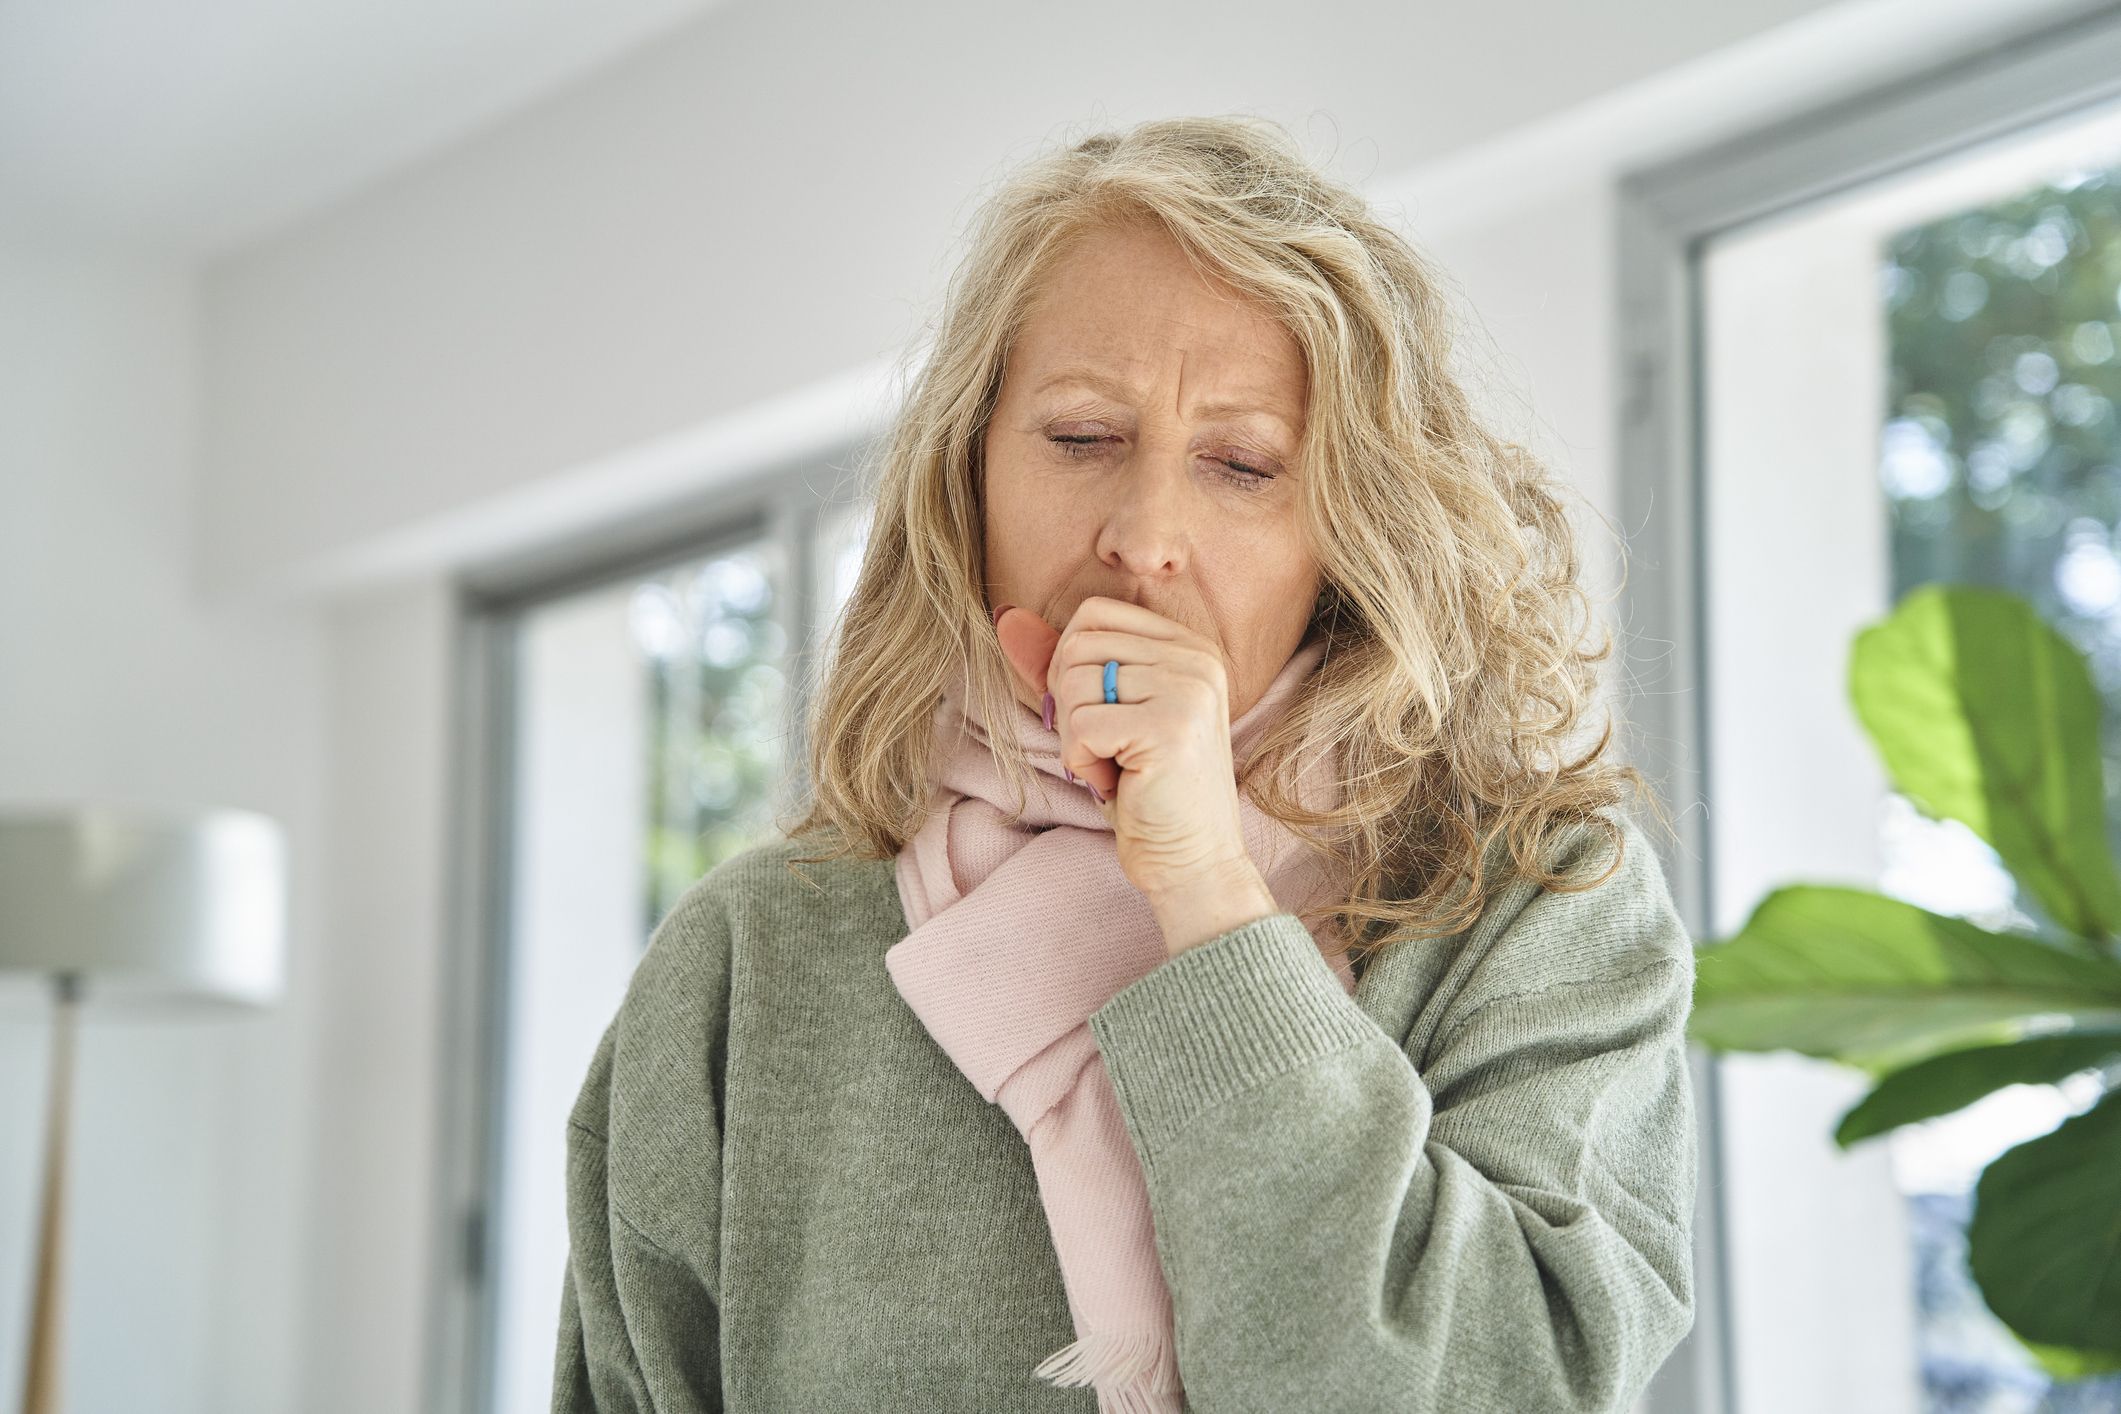 How to Get Rid of a Cough Fast: 16 Proven Remedies